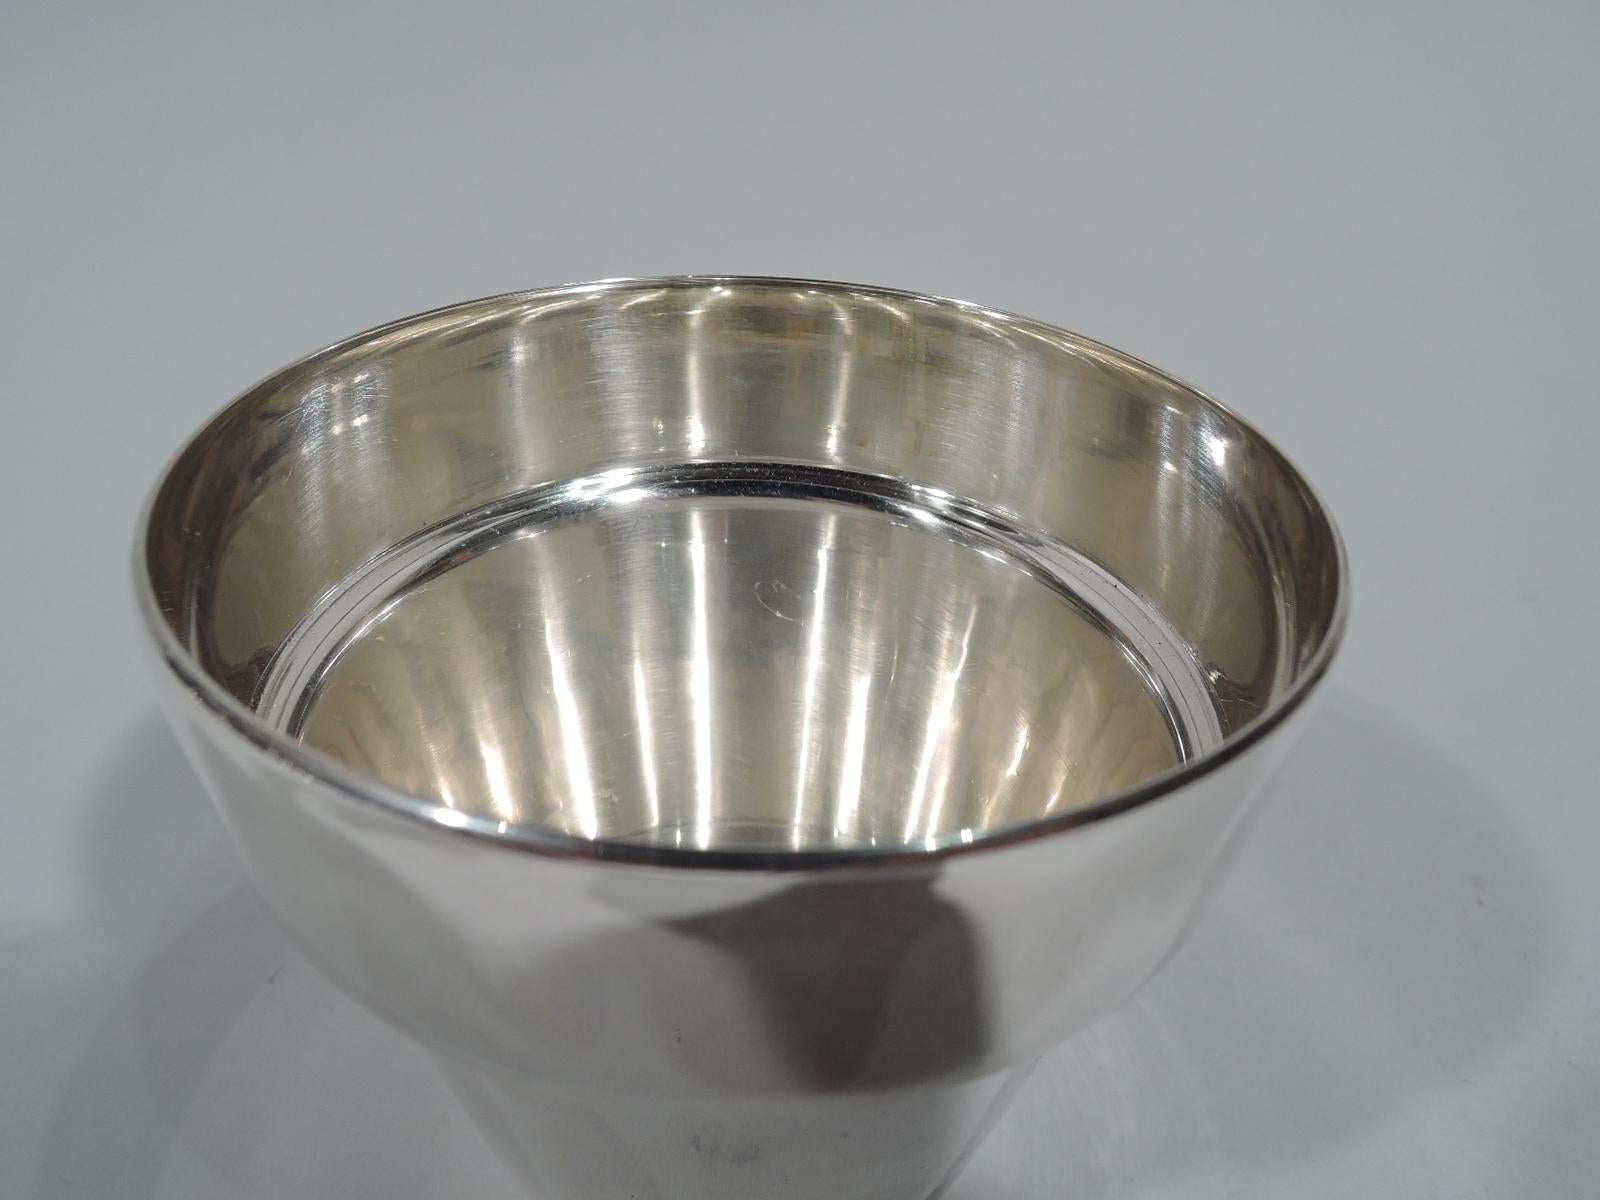 Modern sterling silver vase. Traditional flower pot form with straight and tapering sides and overhanging top. Bottom solid. Marked “©2003 Tiffany & Co. / Makers / Sterling Silver / 24037 / 925”. Weight: 6 troy ounces.